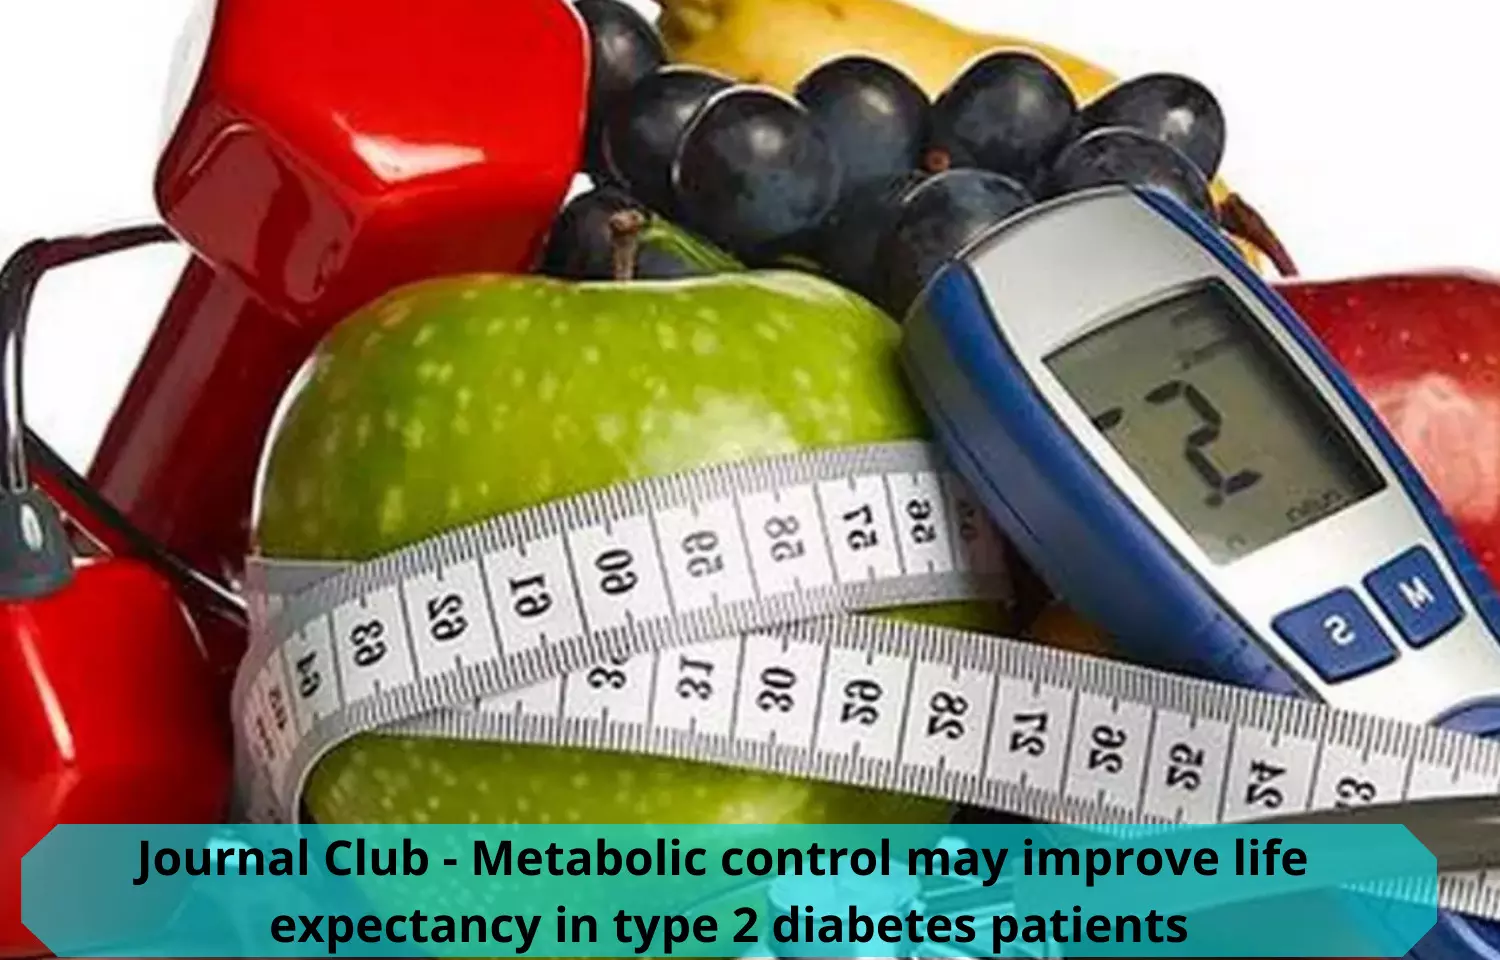 Journal Club - Metabolic control may improve life expectancy in type 2 diabetes patients